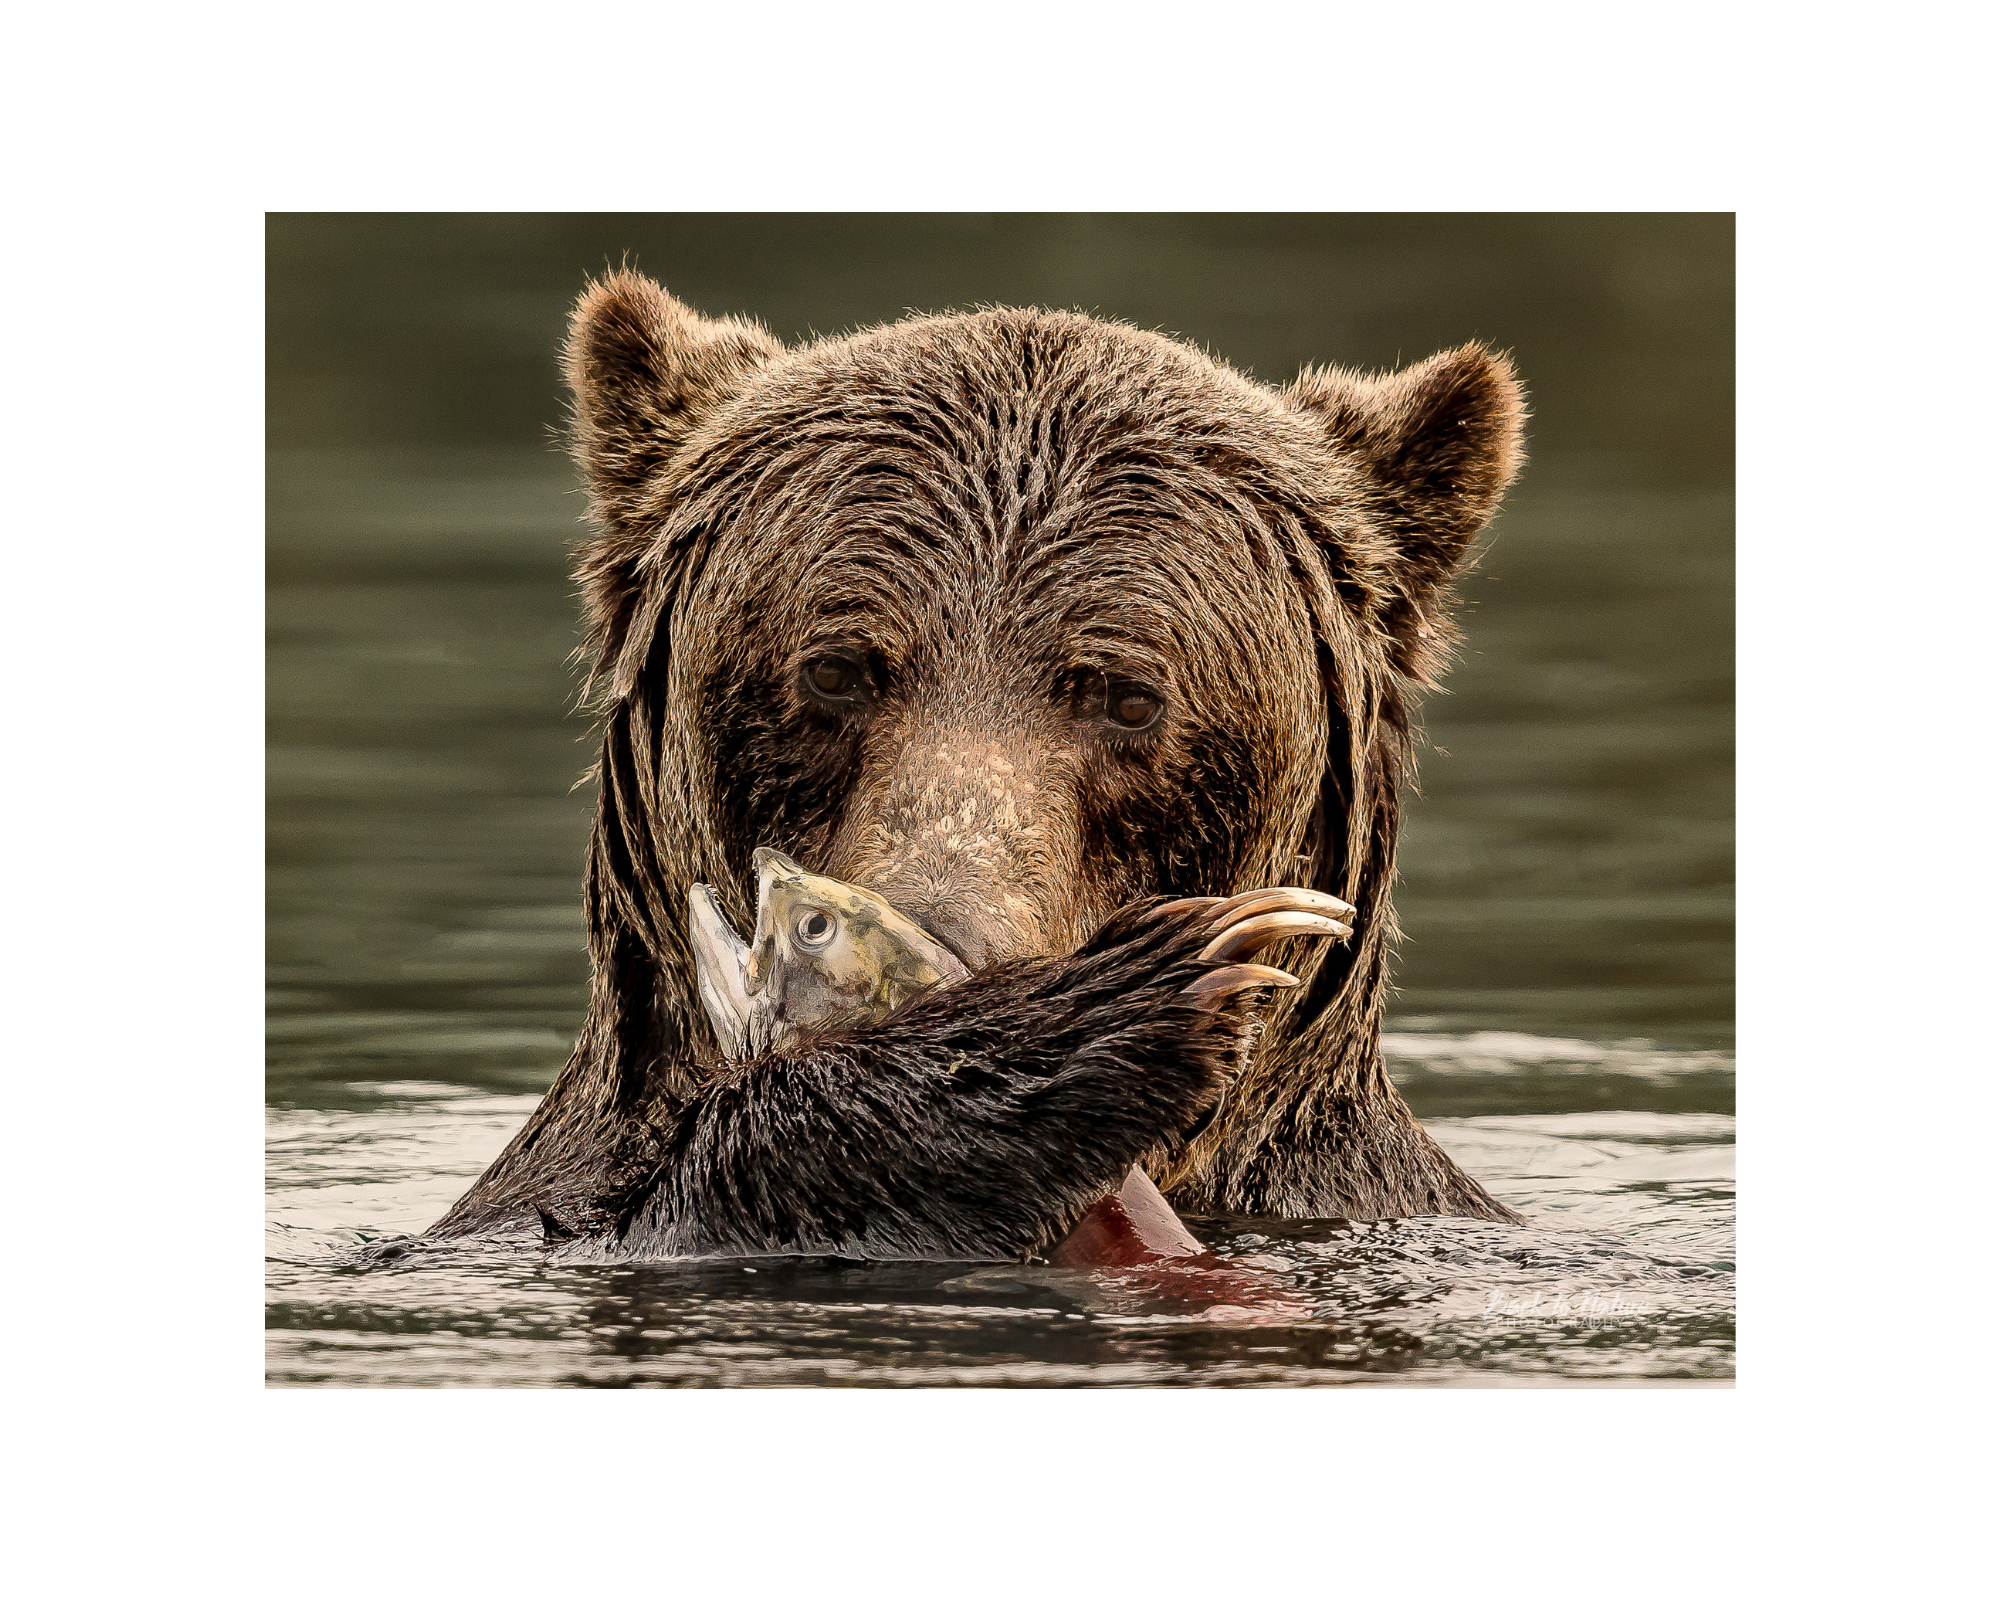 "The Prize" BC Mountain Grizzly Bear - 10" x 8" Matted Print